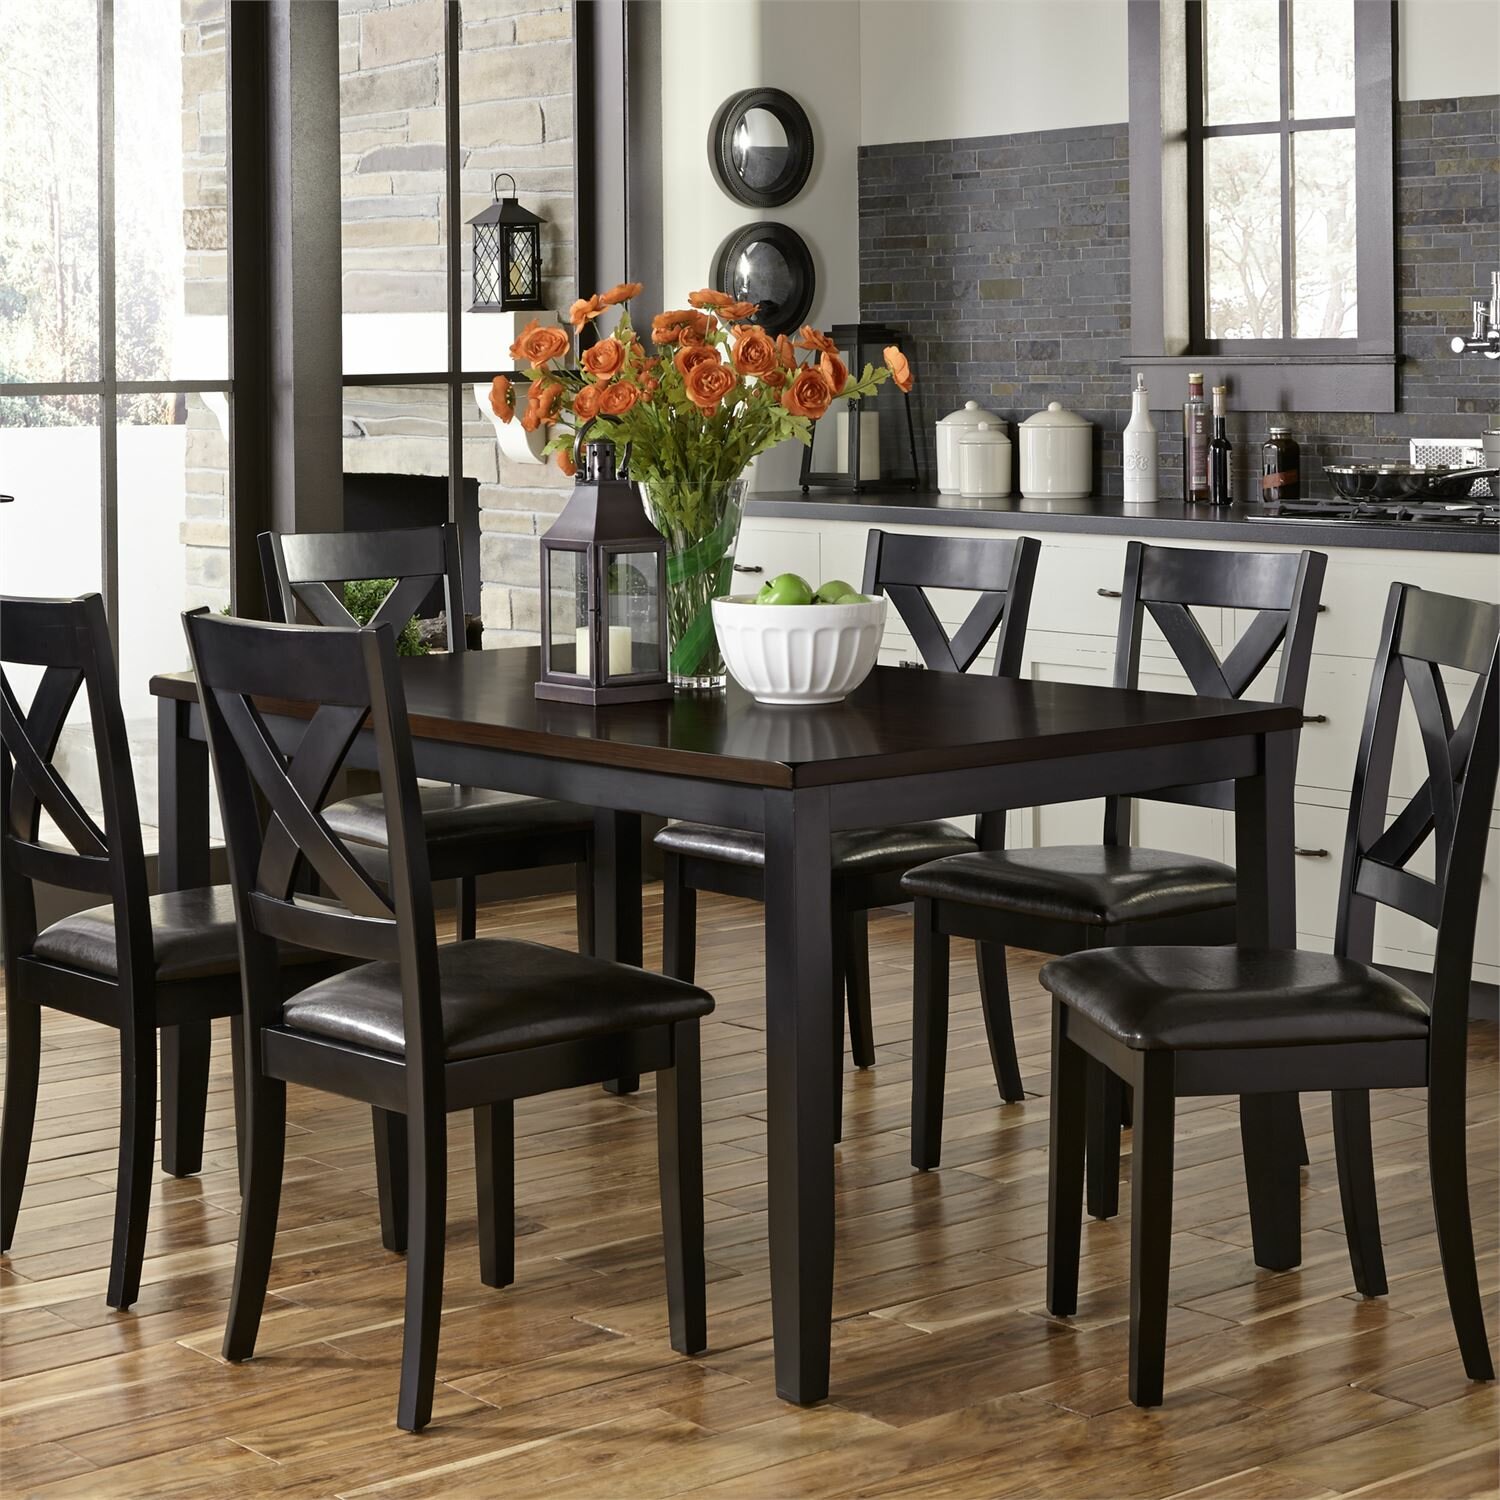 Darby Home Co Nadine 6 Person Dining Set Reviews Wayfair